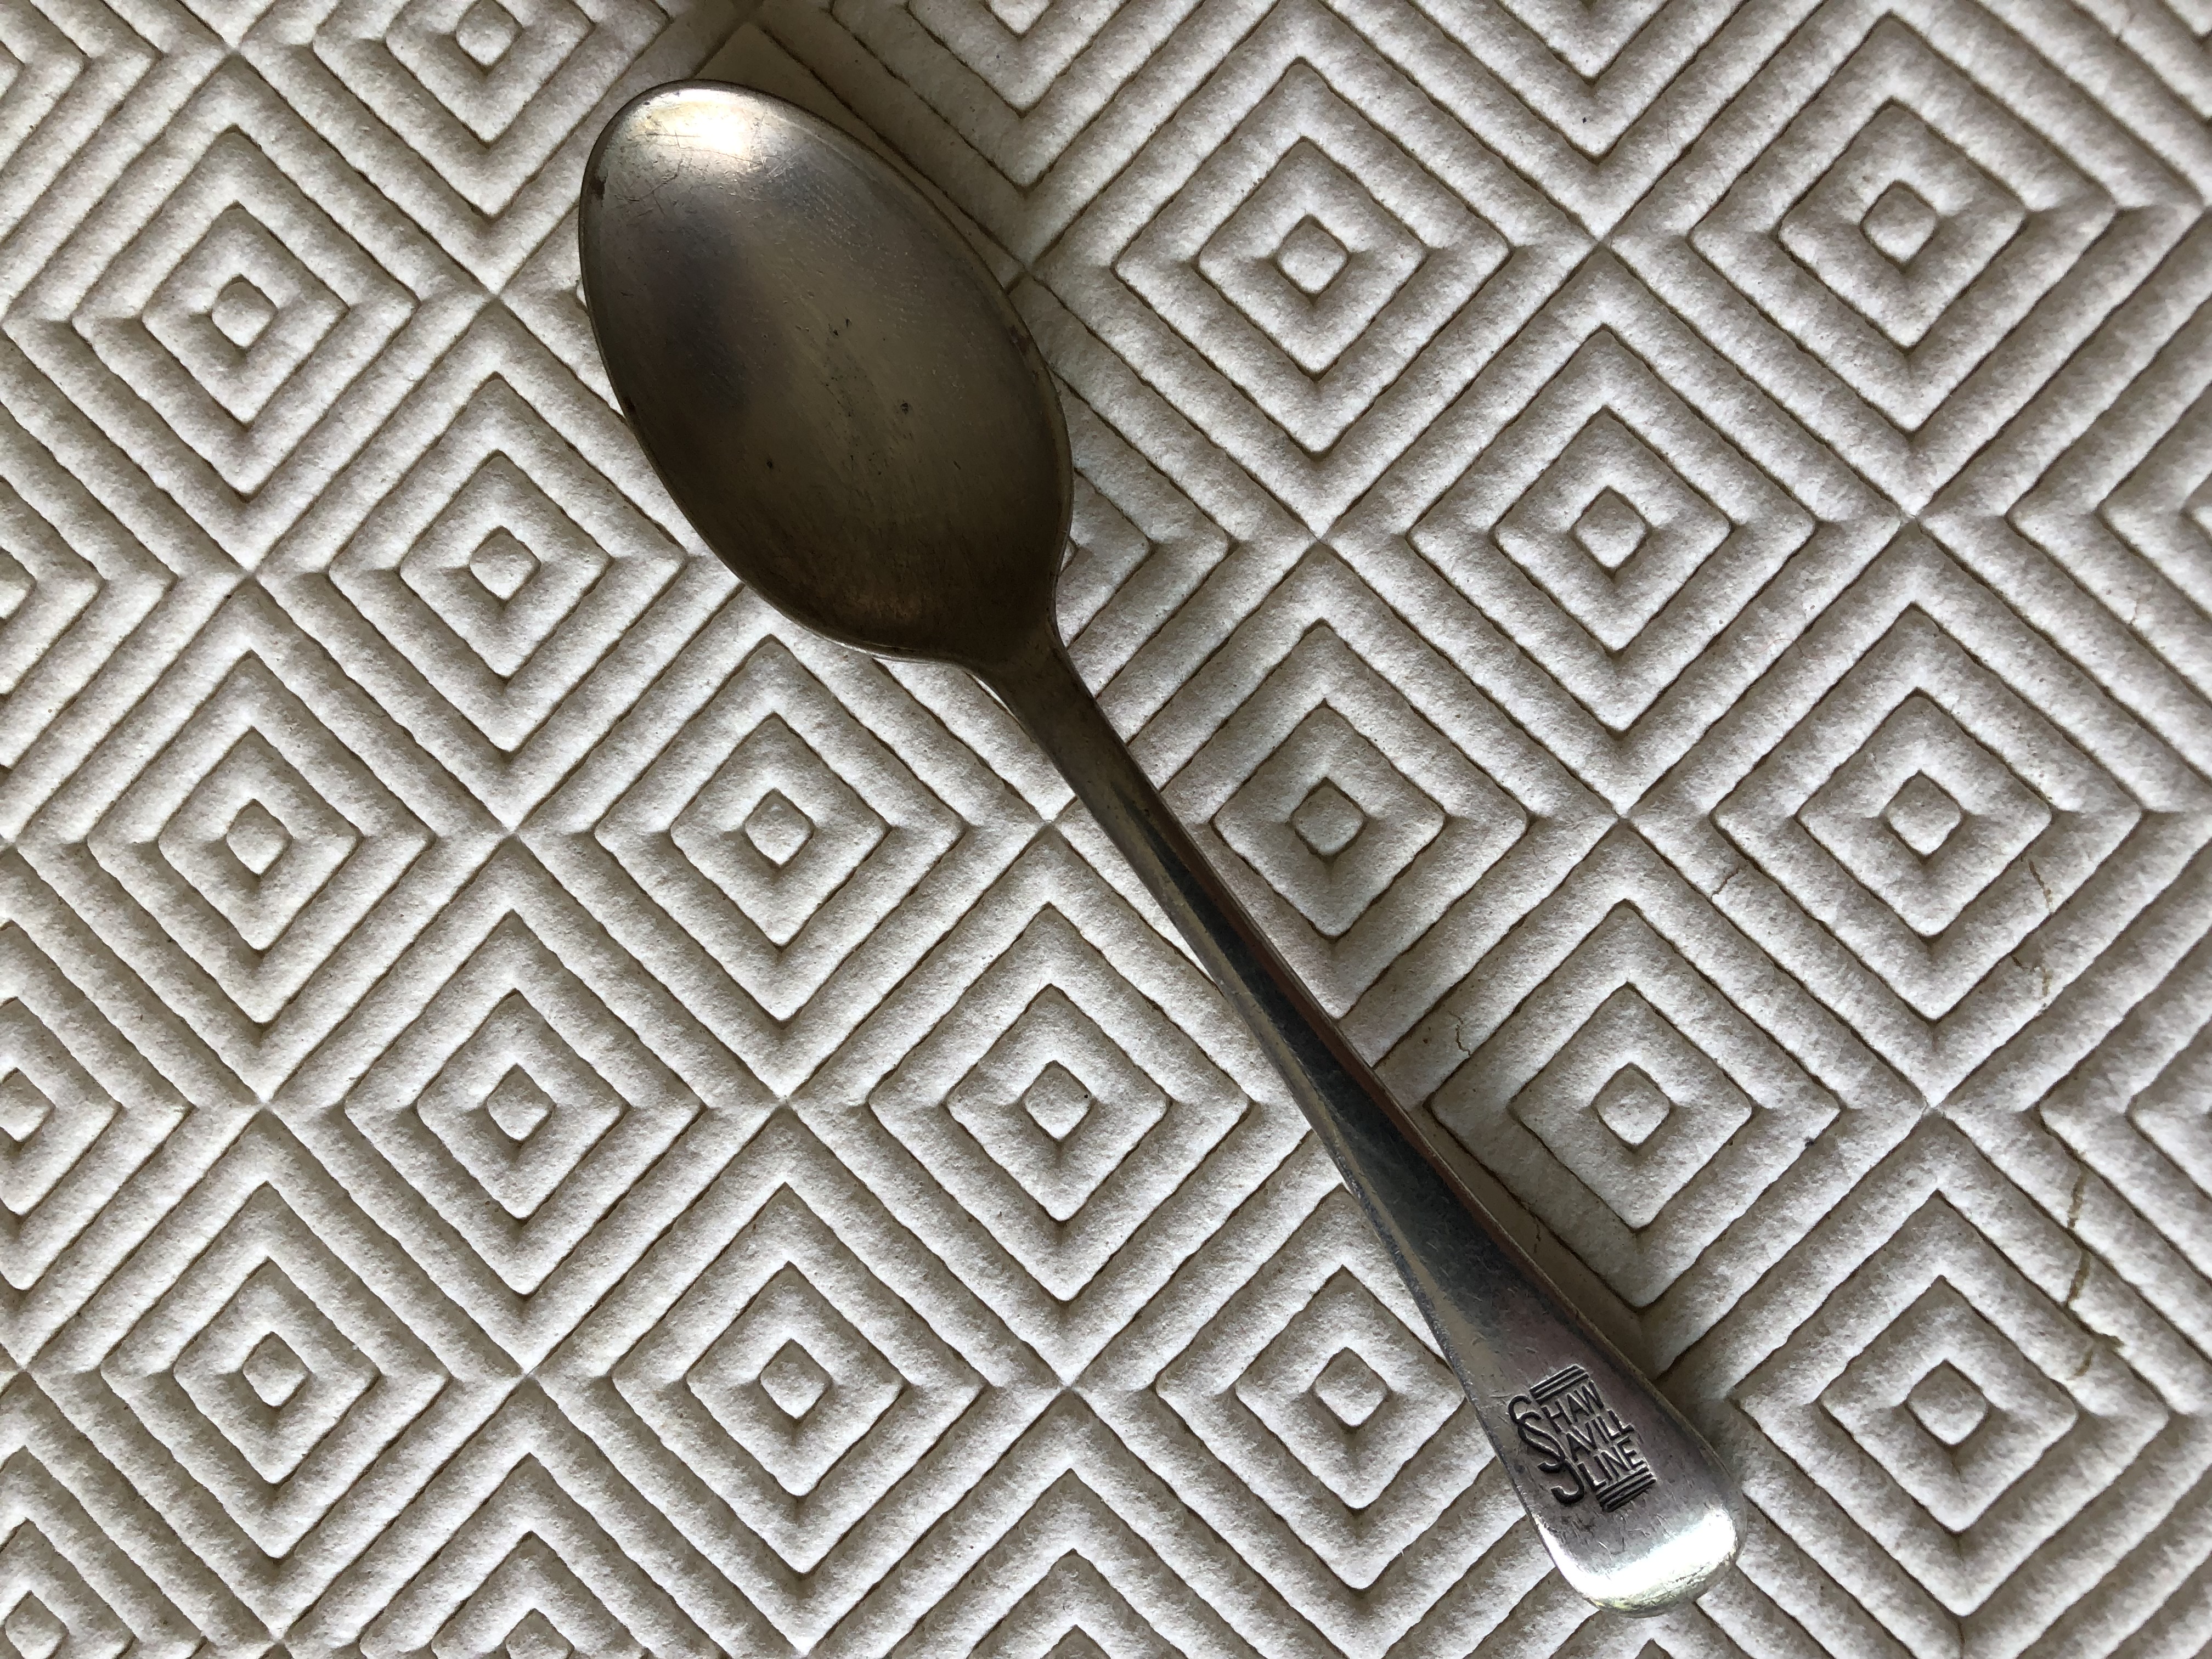 AS USED IN SERVICE TEA SPOON FROM THE SHAW SAVILL LINE 